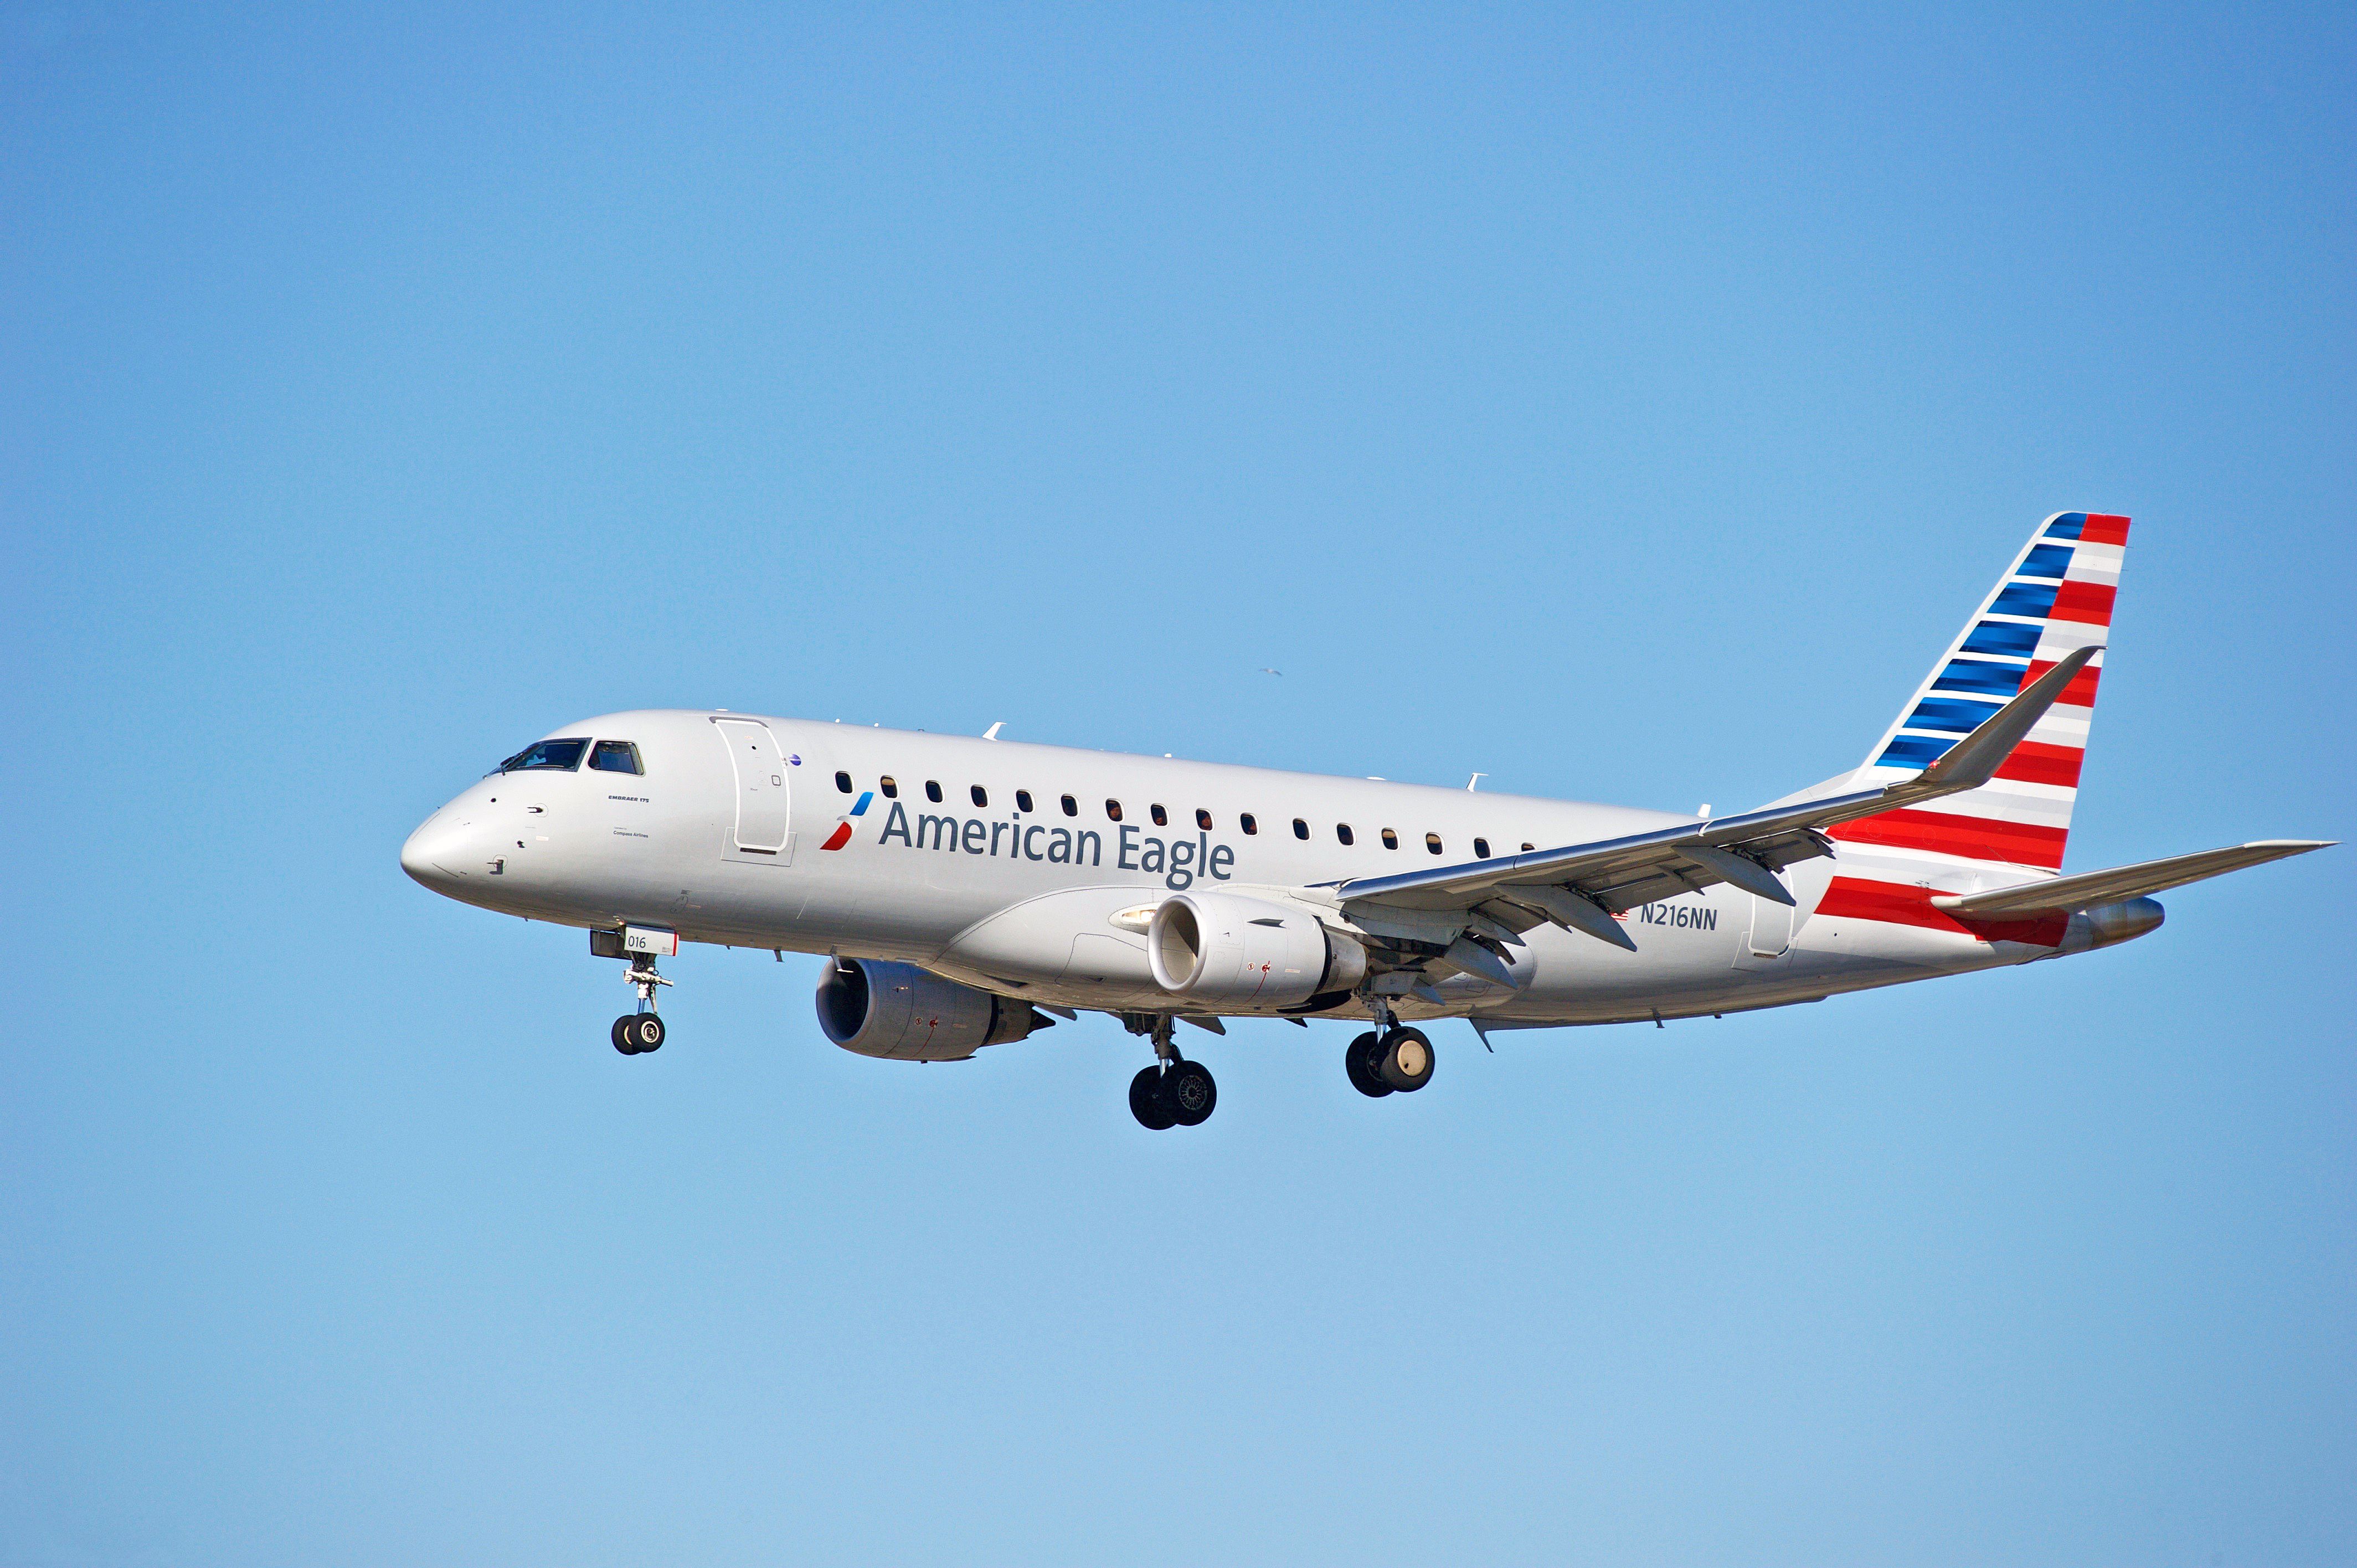 An American Eagle embraer aircraft 